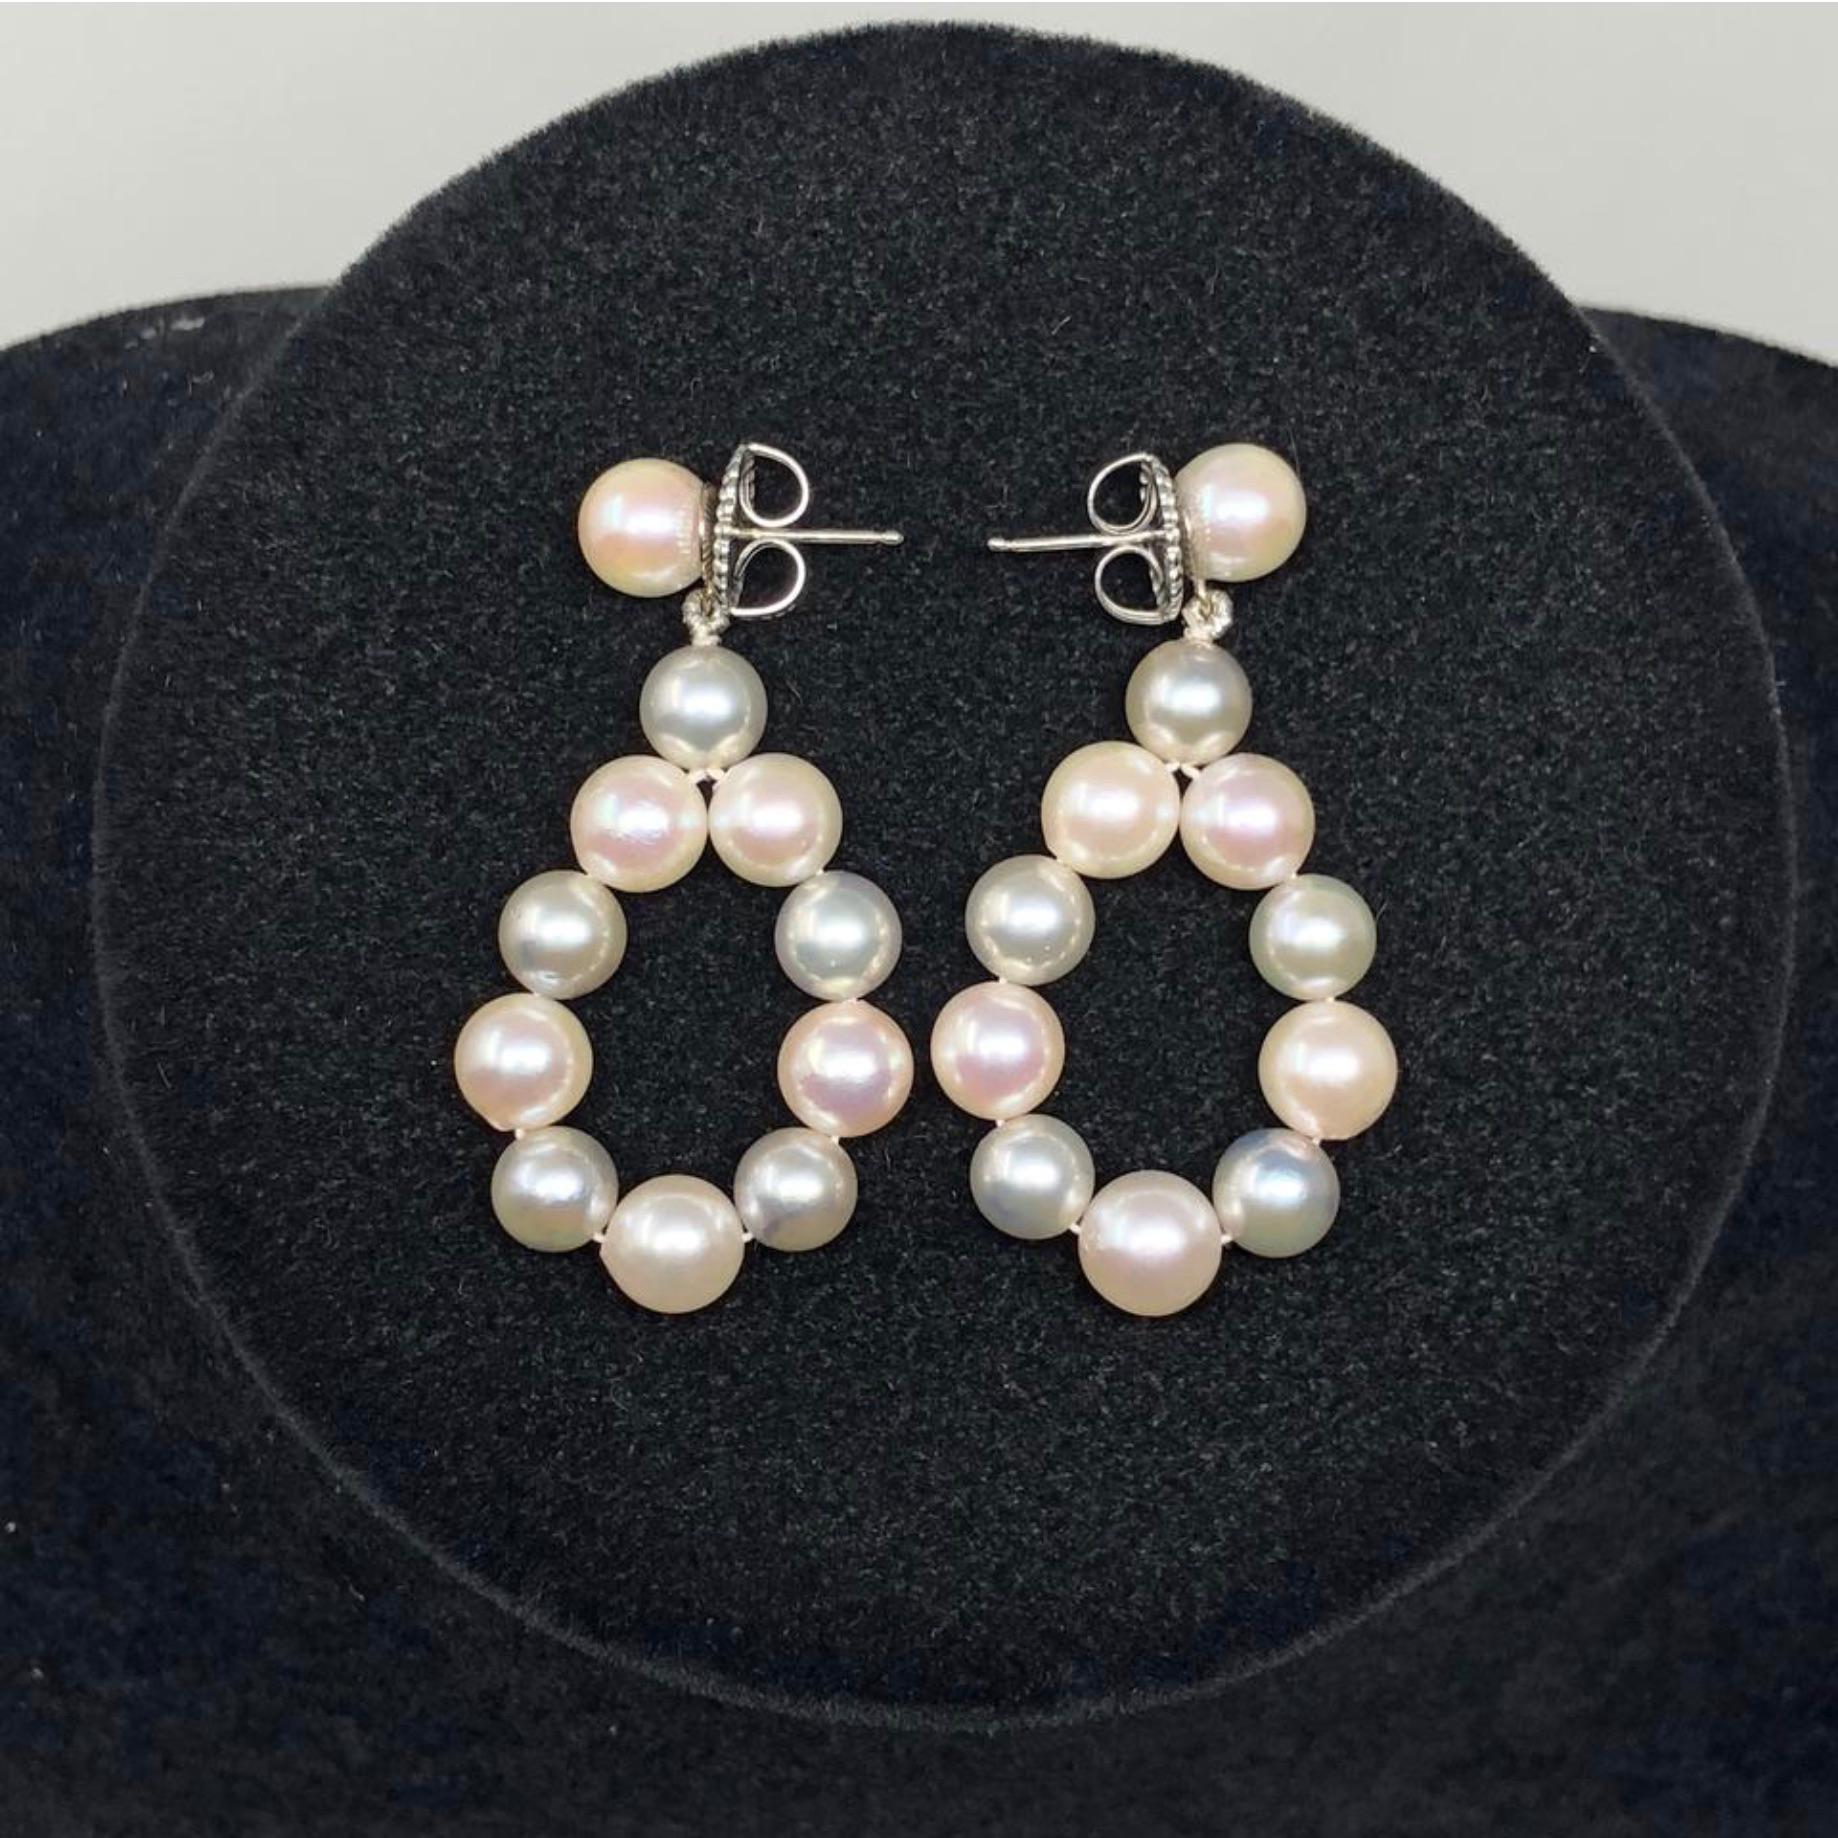 Beijing Pearl Market Custom Hanging Loop Grey and White Pearl Earrings In Excellent Condition For Sale In Saint Charles, IL